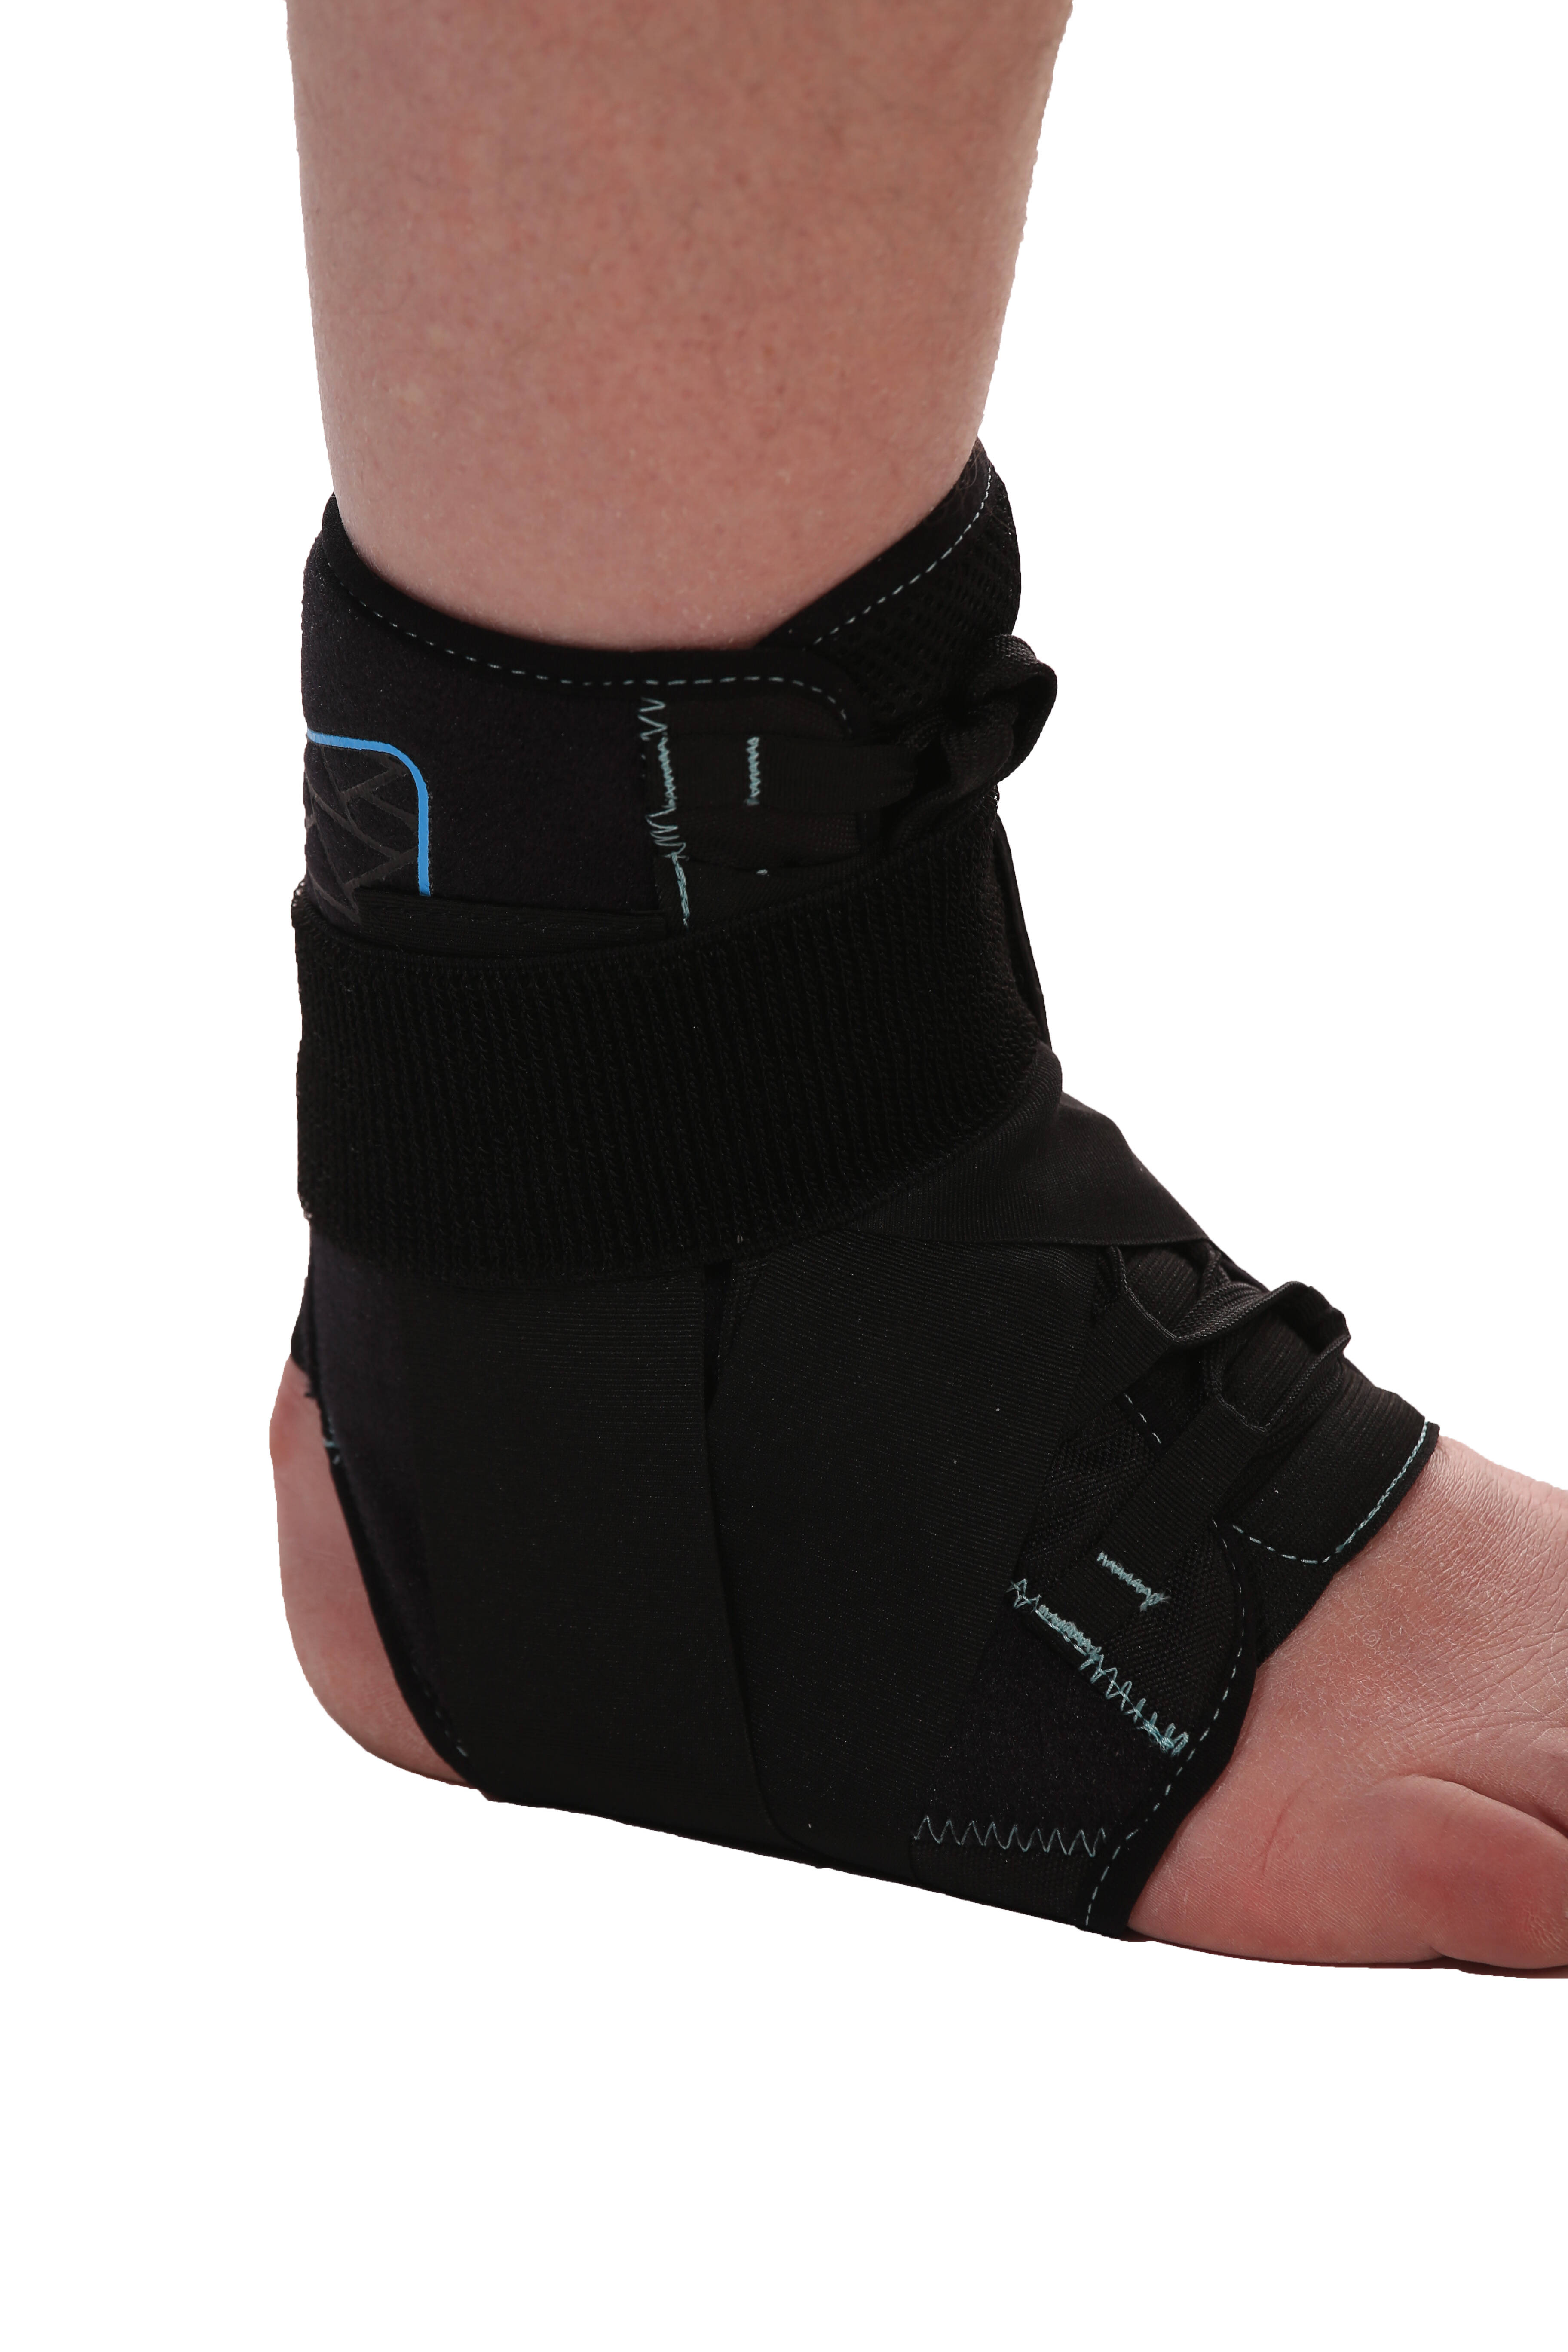 Modetro Sports Ankle Brace Compression Support Sleeve w/Free Ankle